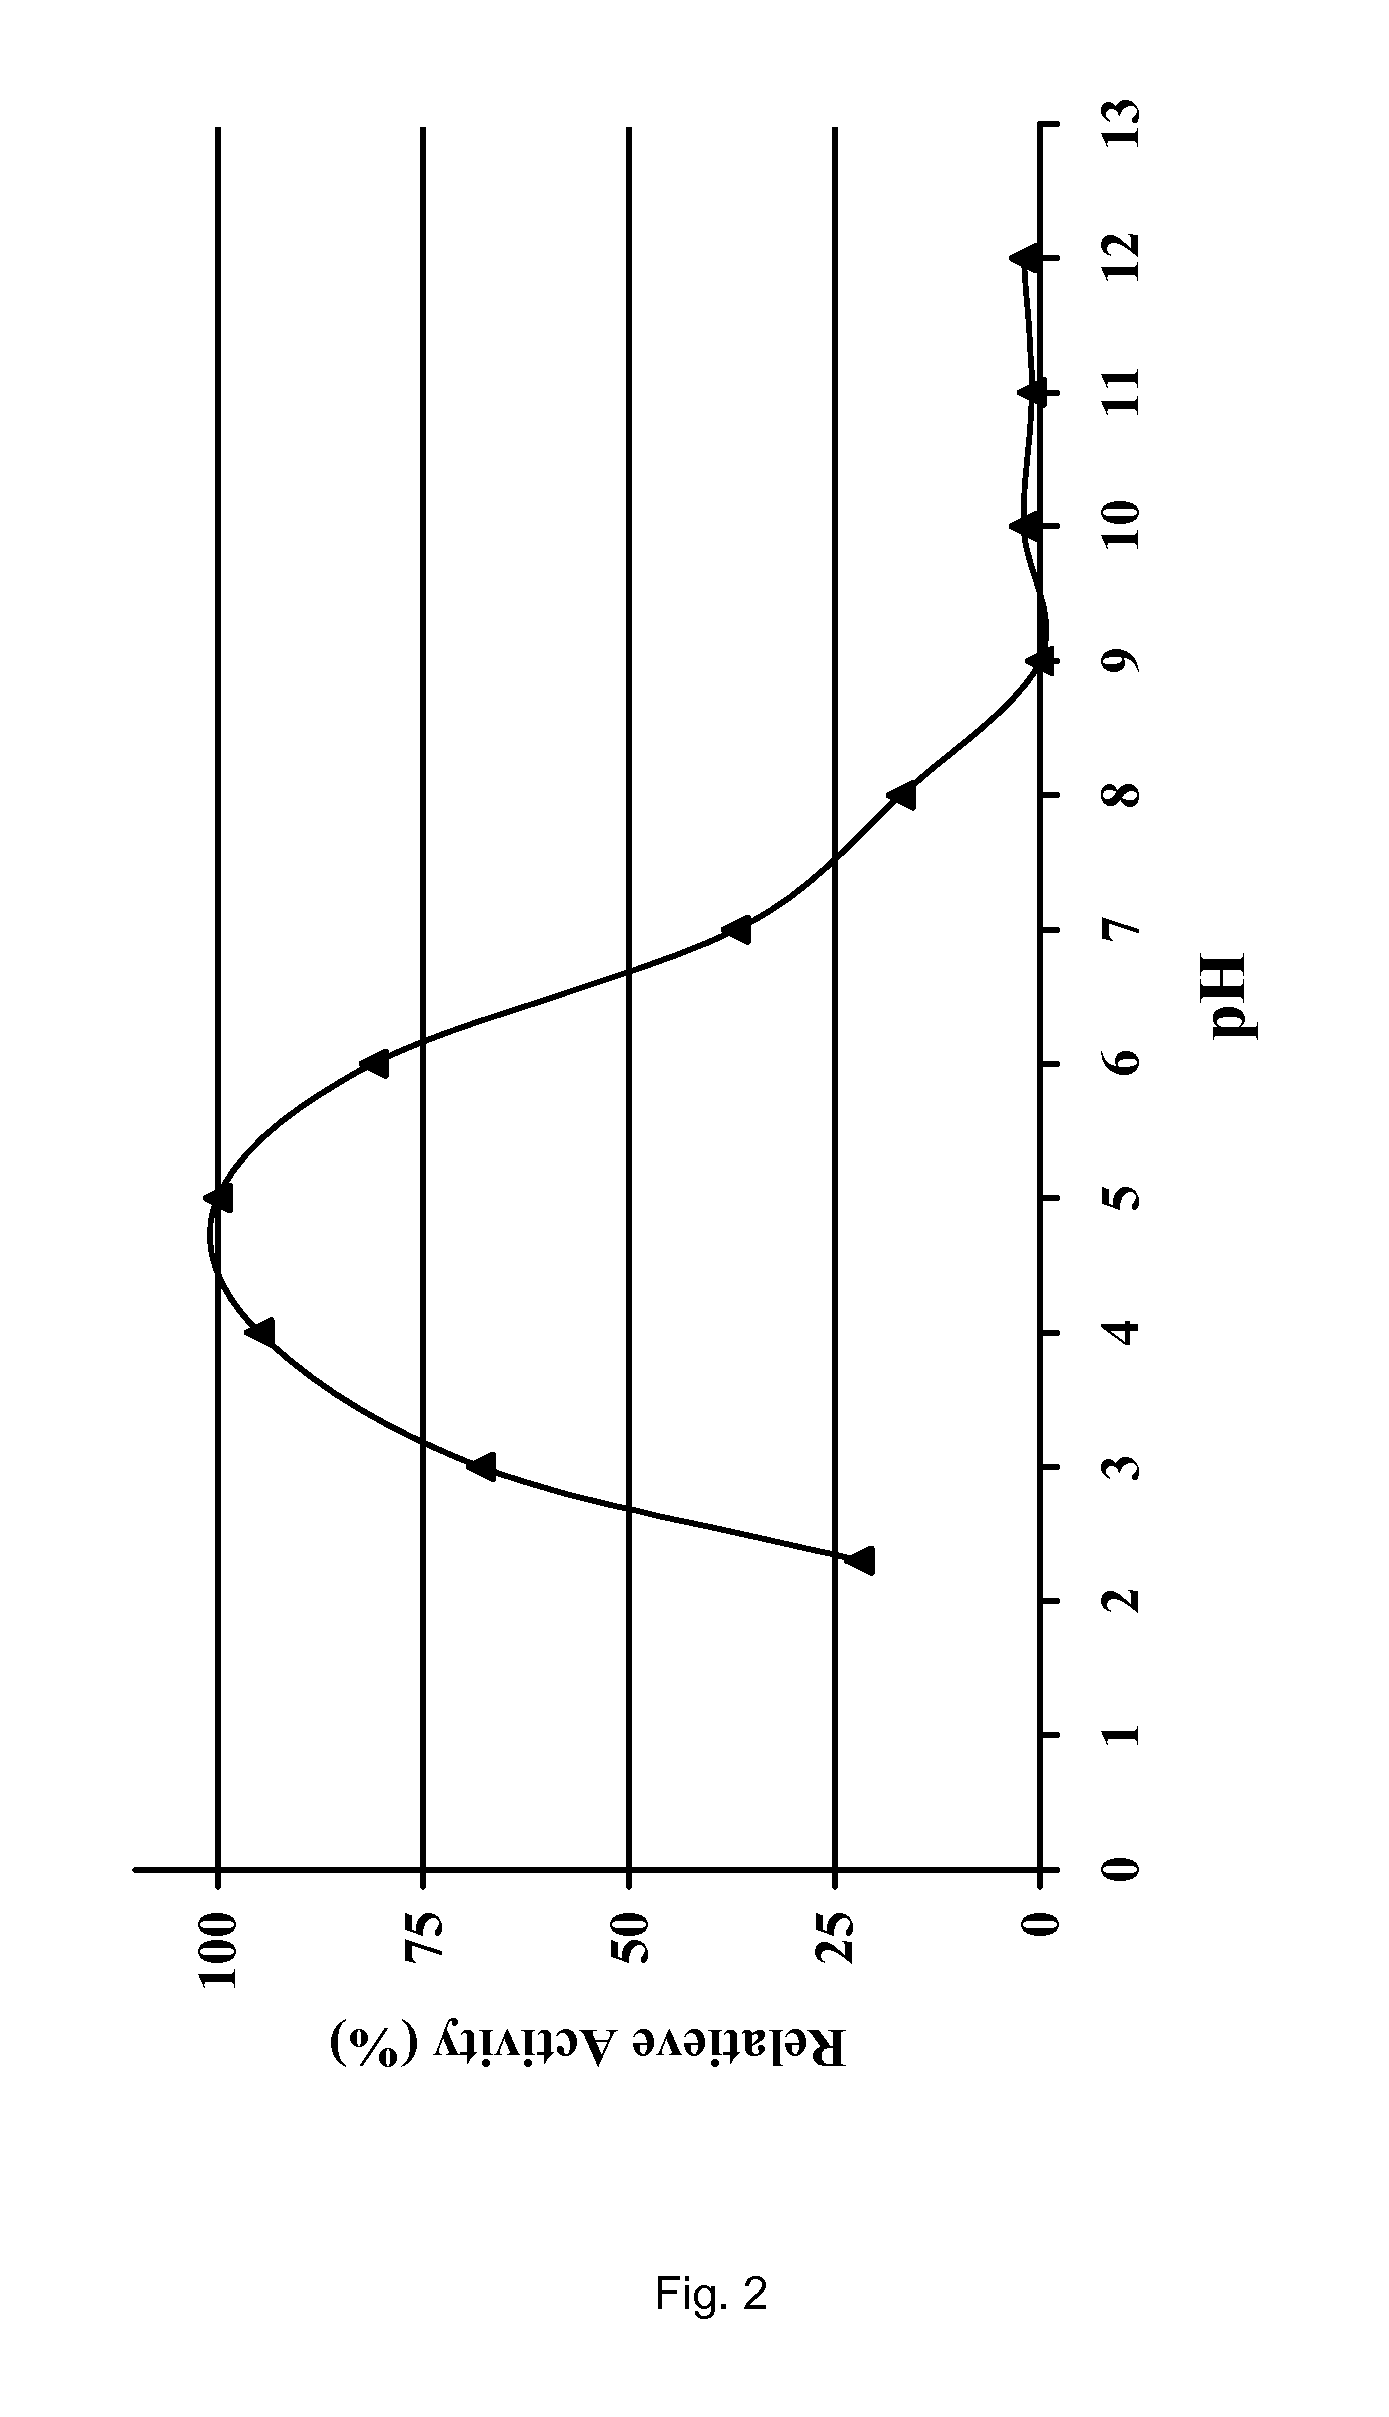 Enzyme composition and application thereof in the treatment of pancreatic insufficiency